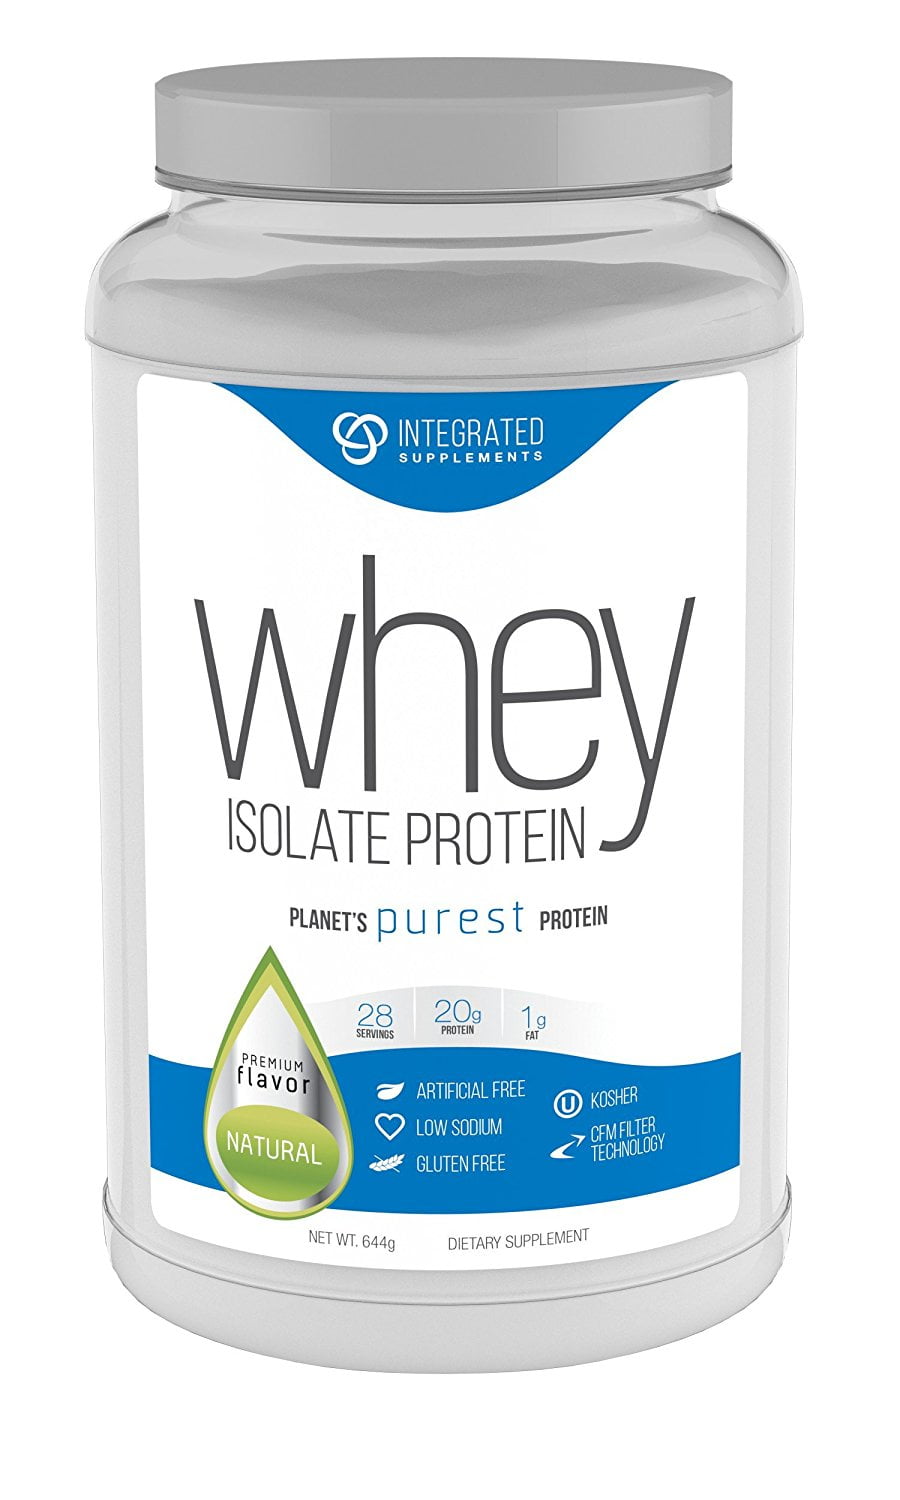 Integrated Supplements Wild Strawberry Whey Isolate Protein Powder